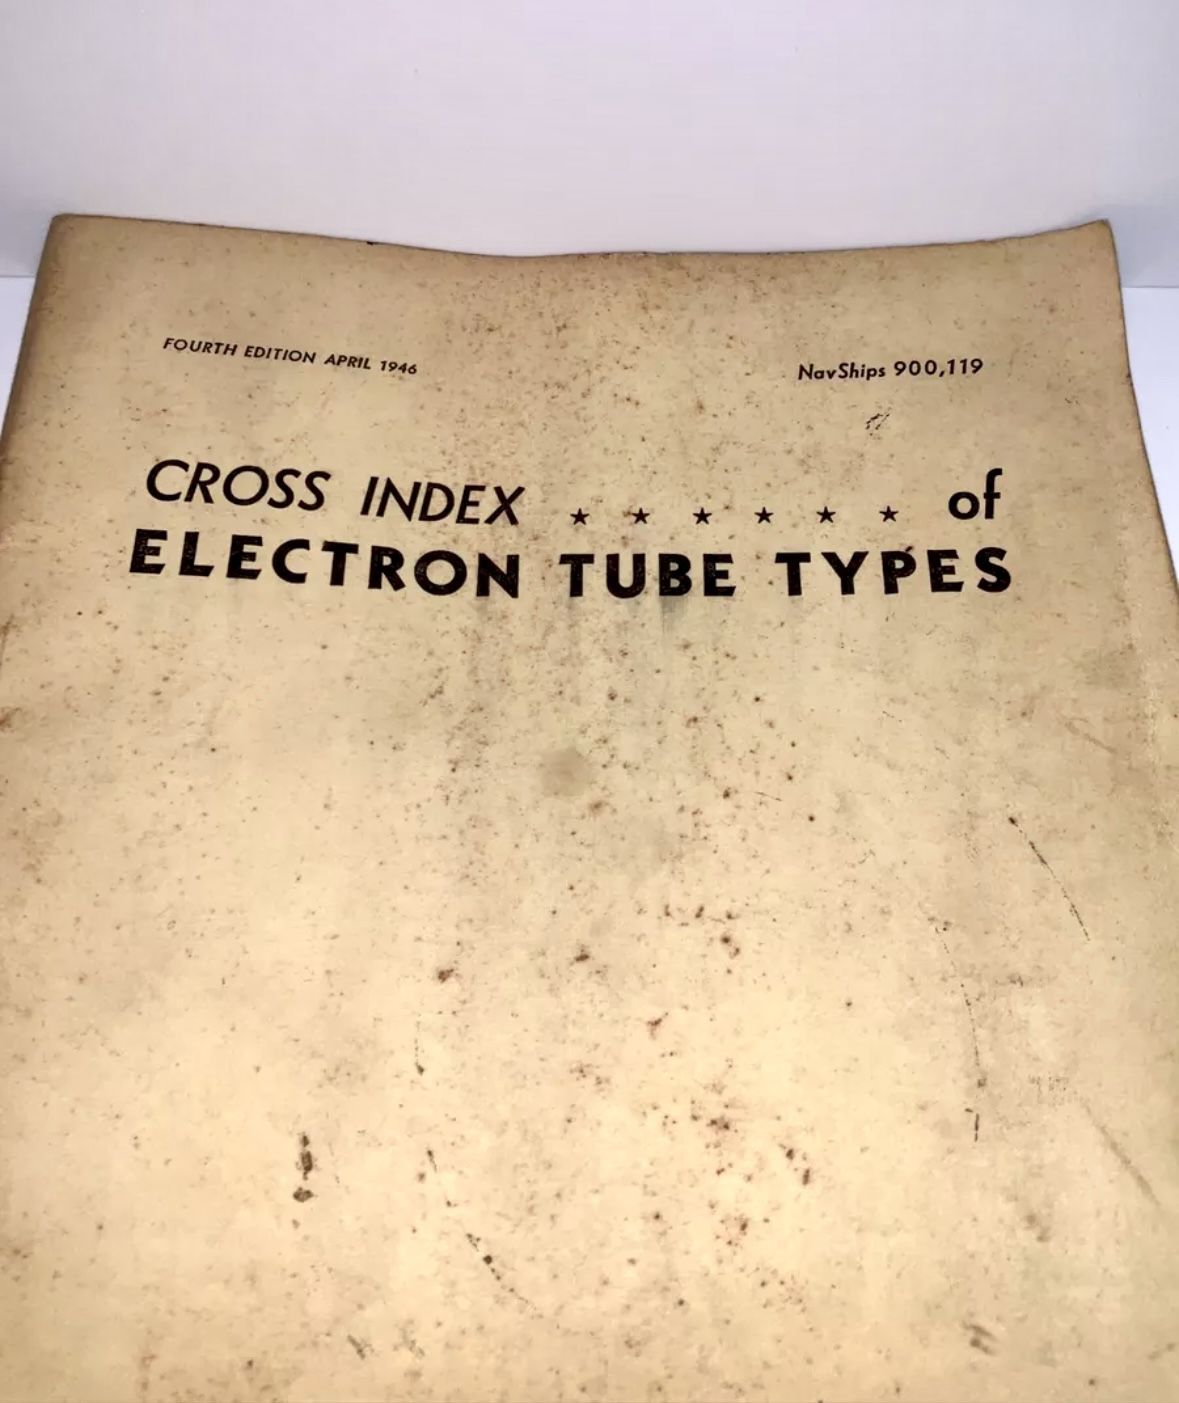 Cross Index of Electron Tube Type Forth Edition April 1946 War Department.